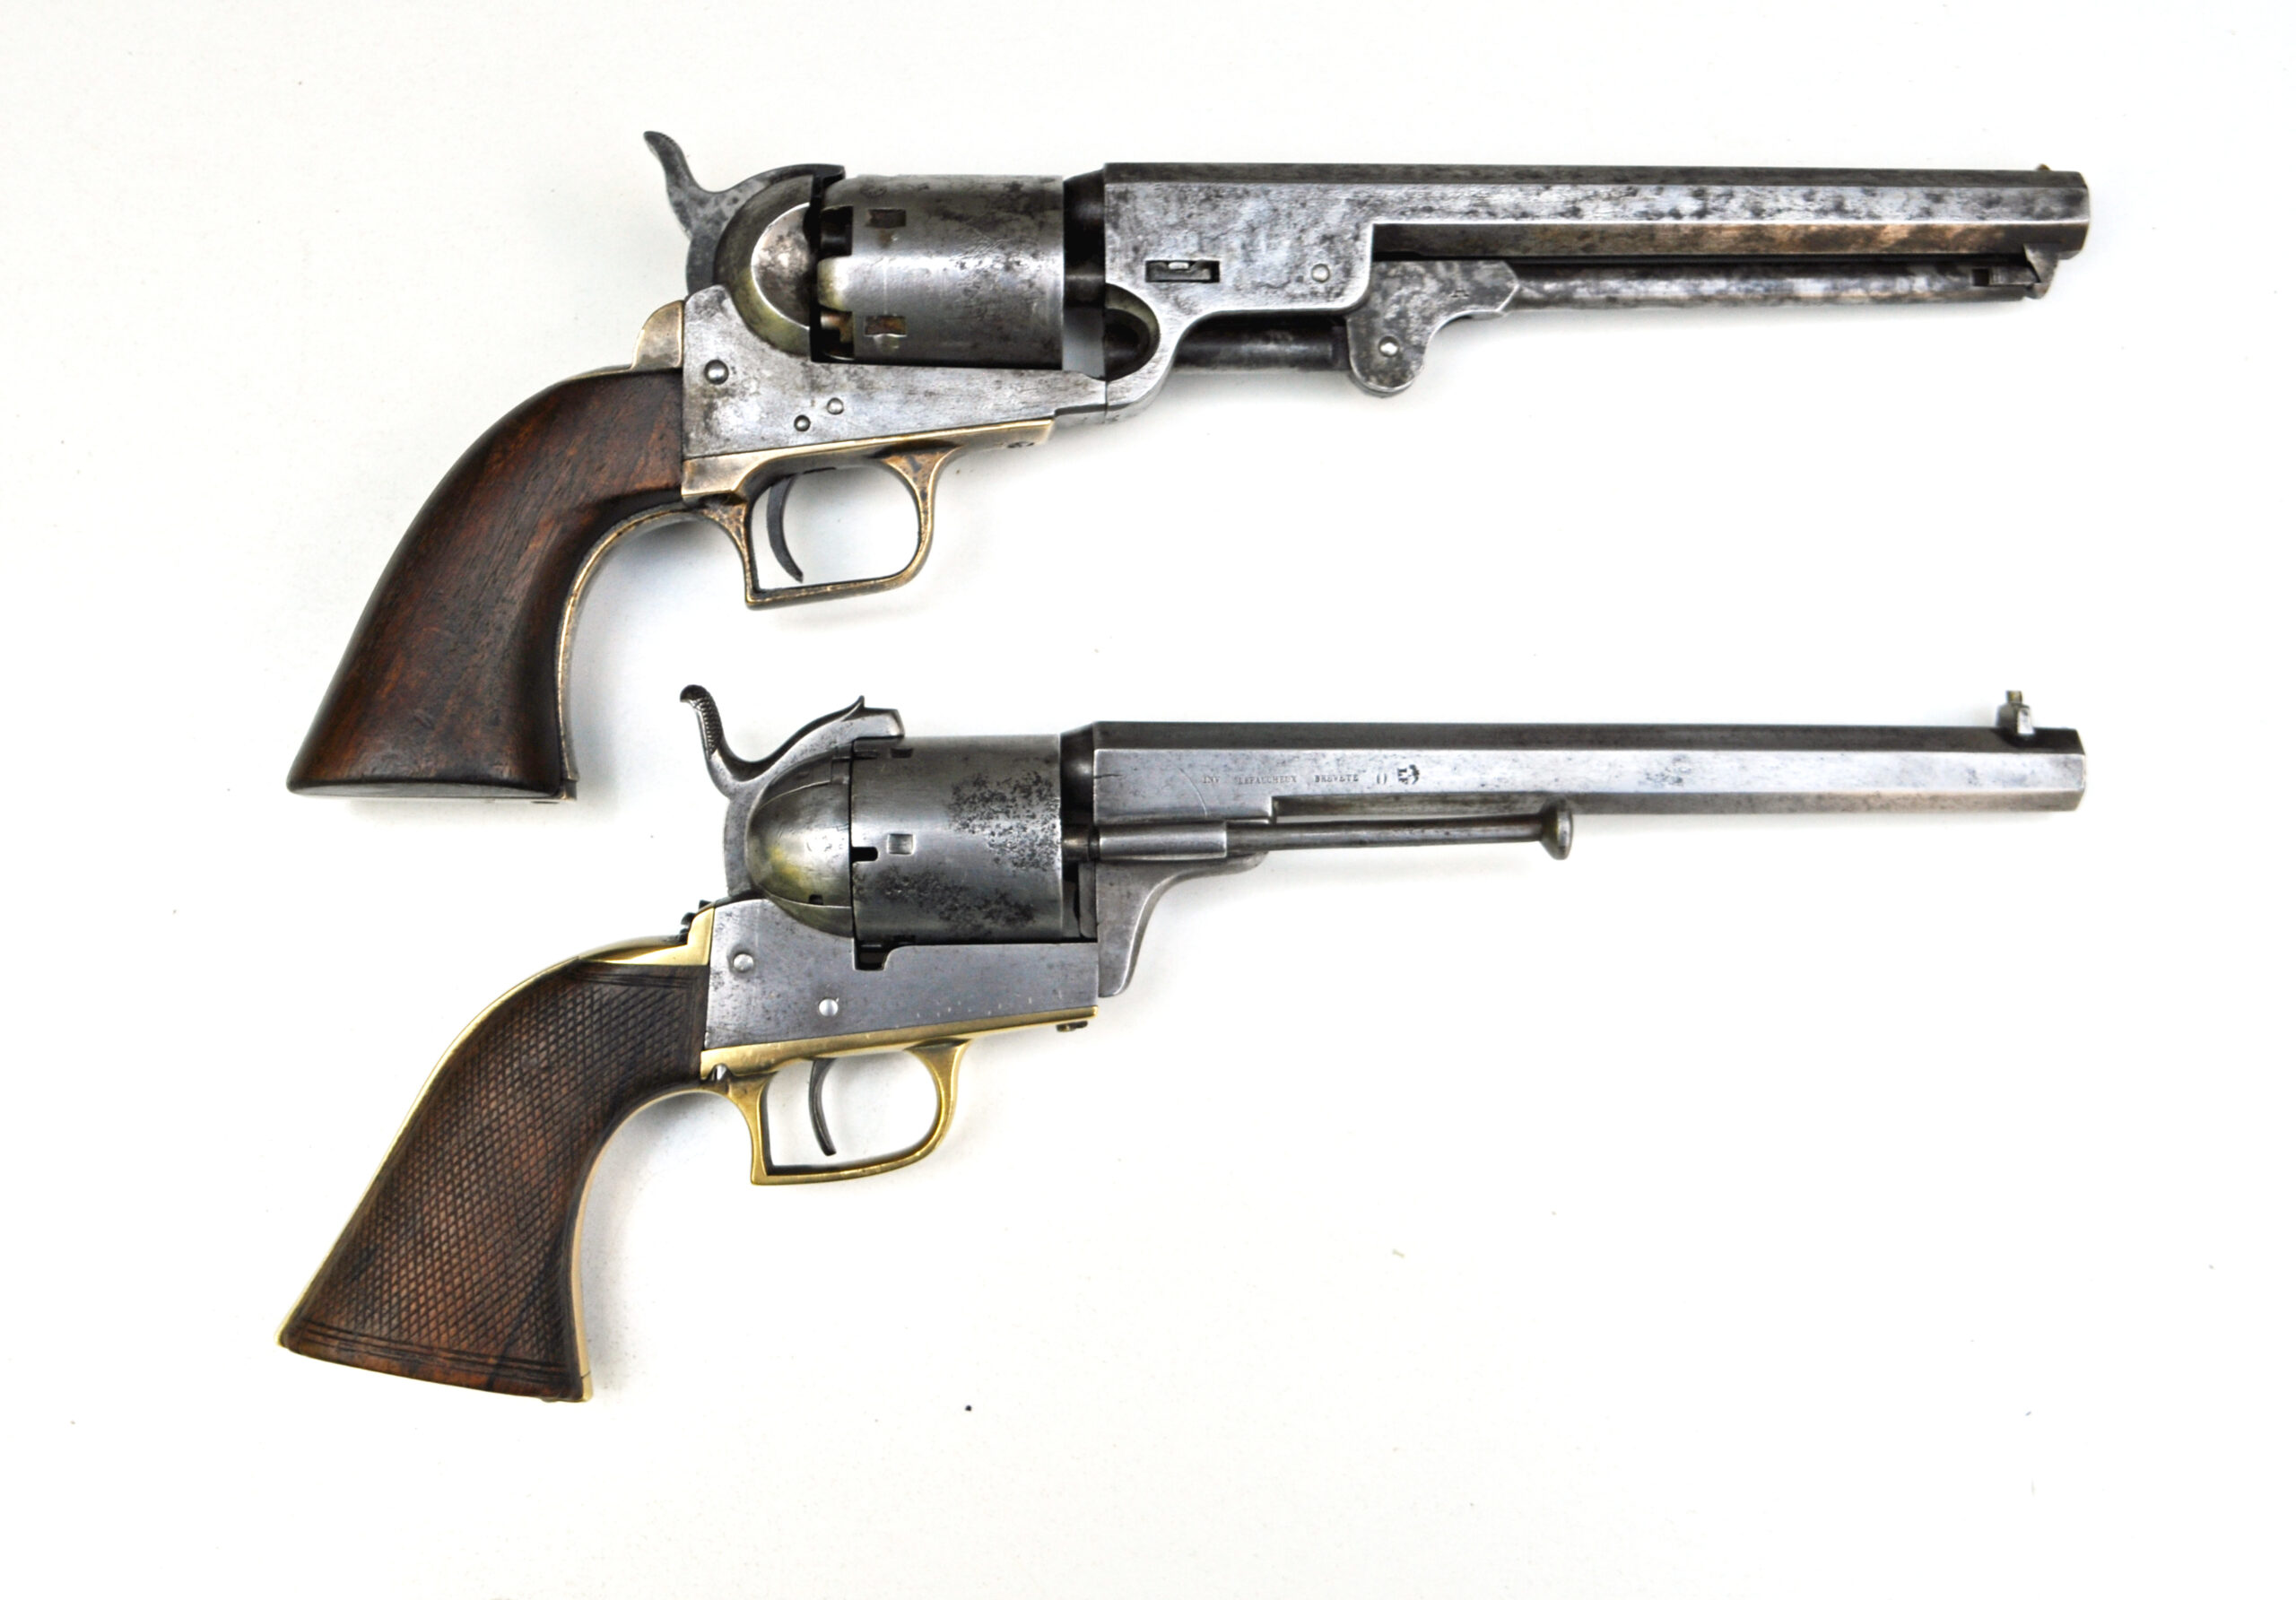 LF0 - The first prototype of the Lefaucheux Model 1854 Revolver built on a modified Colt Brevete frame